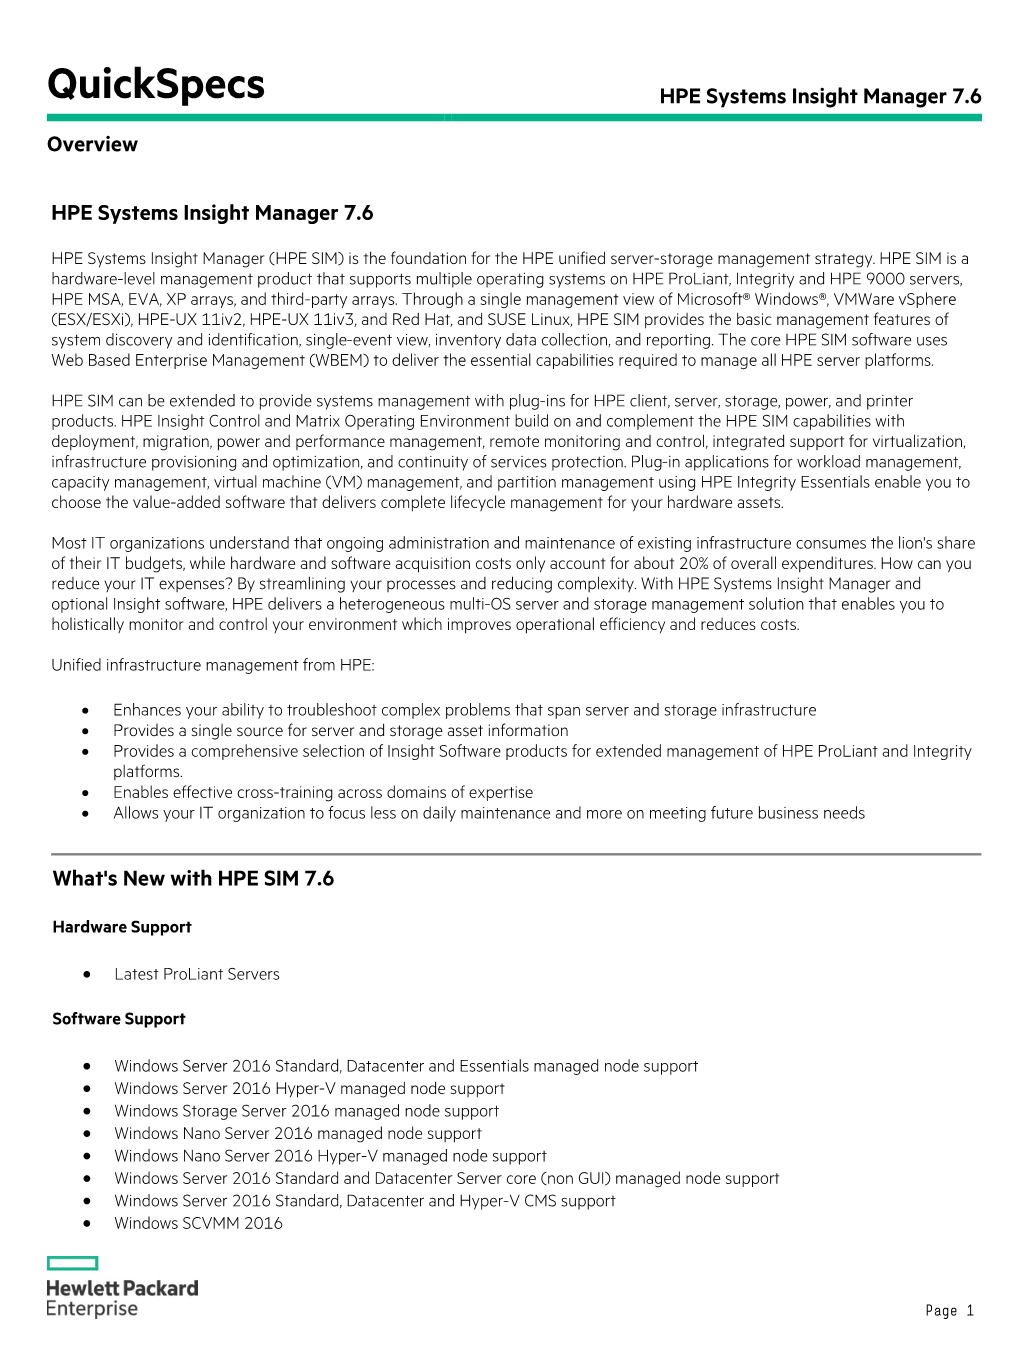 HPE Systems Insight Manager 7.6 Overview